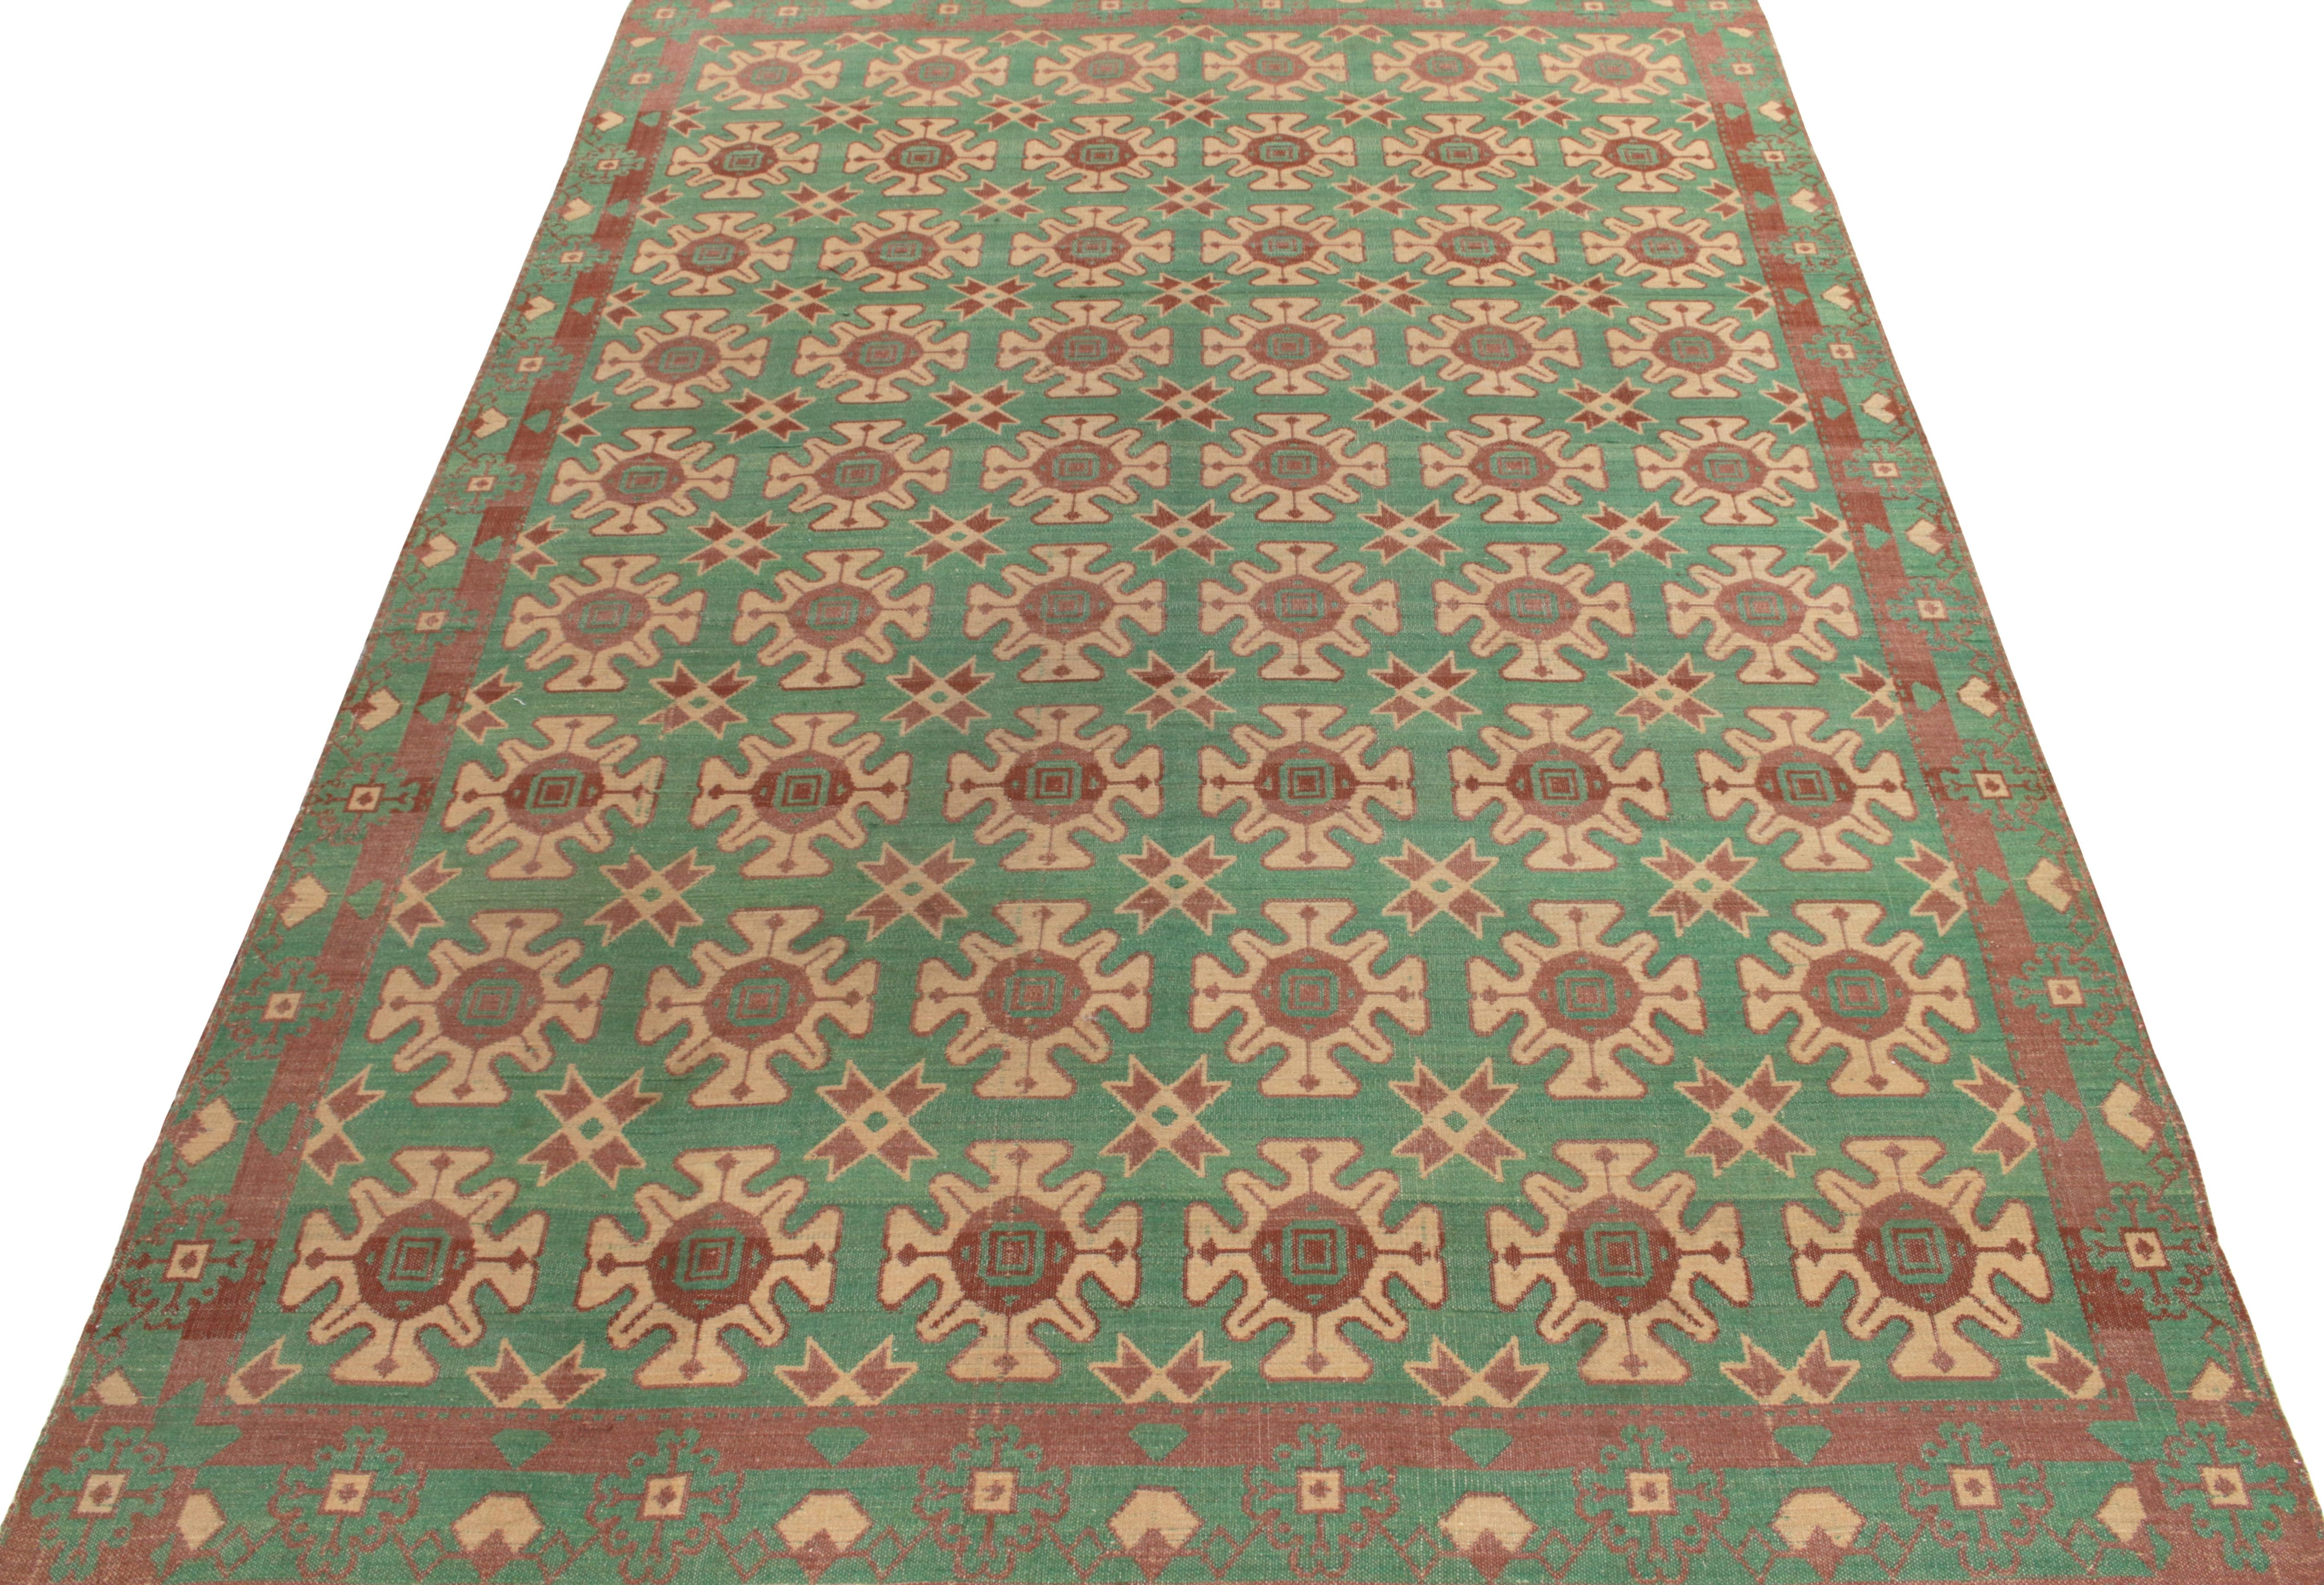 Originating from Turkey circa 1950-1960, a finely handwoven wool vintage kilim rug featuring tribal motifs culminating into a meticulous geometric pattern in beige-brown tones on an aqua green backdrop for a scintillating sense of movement. Bearing